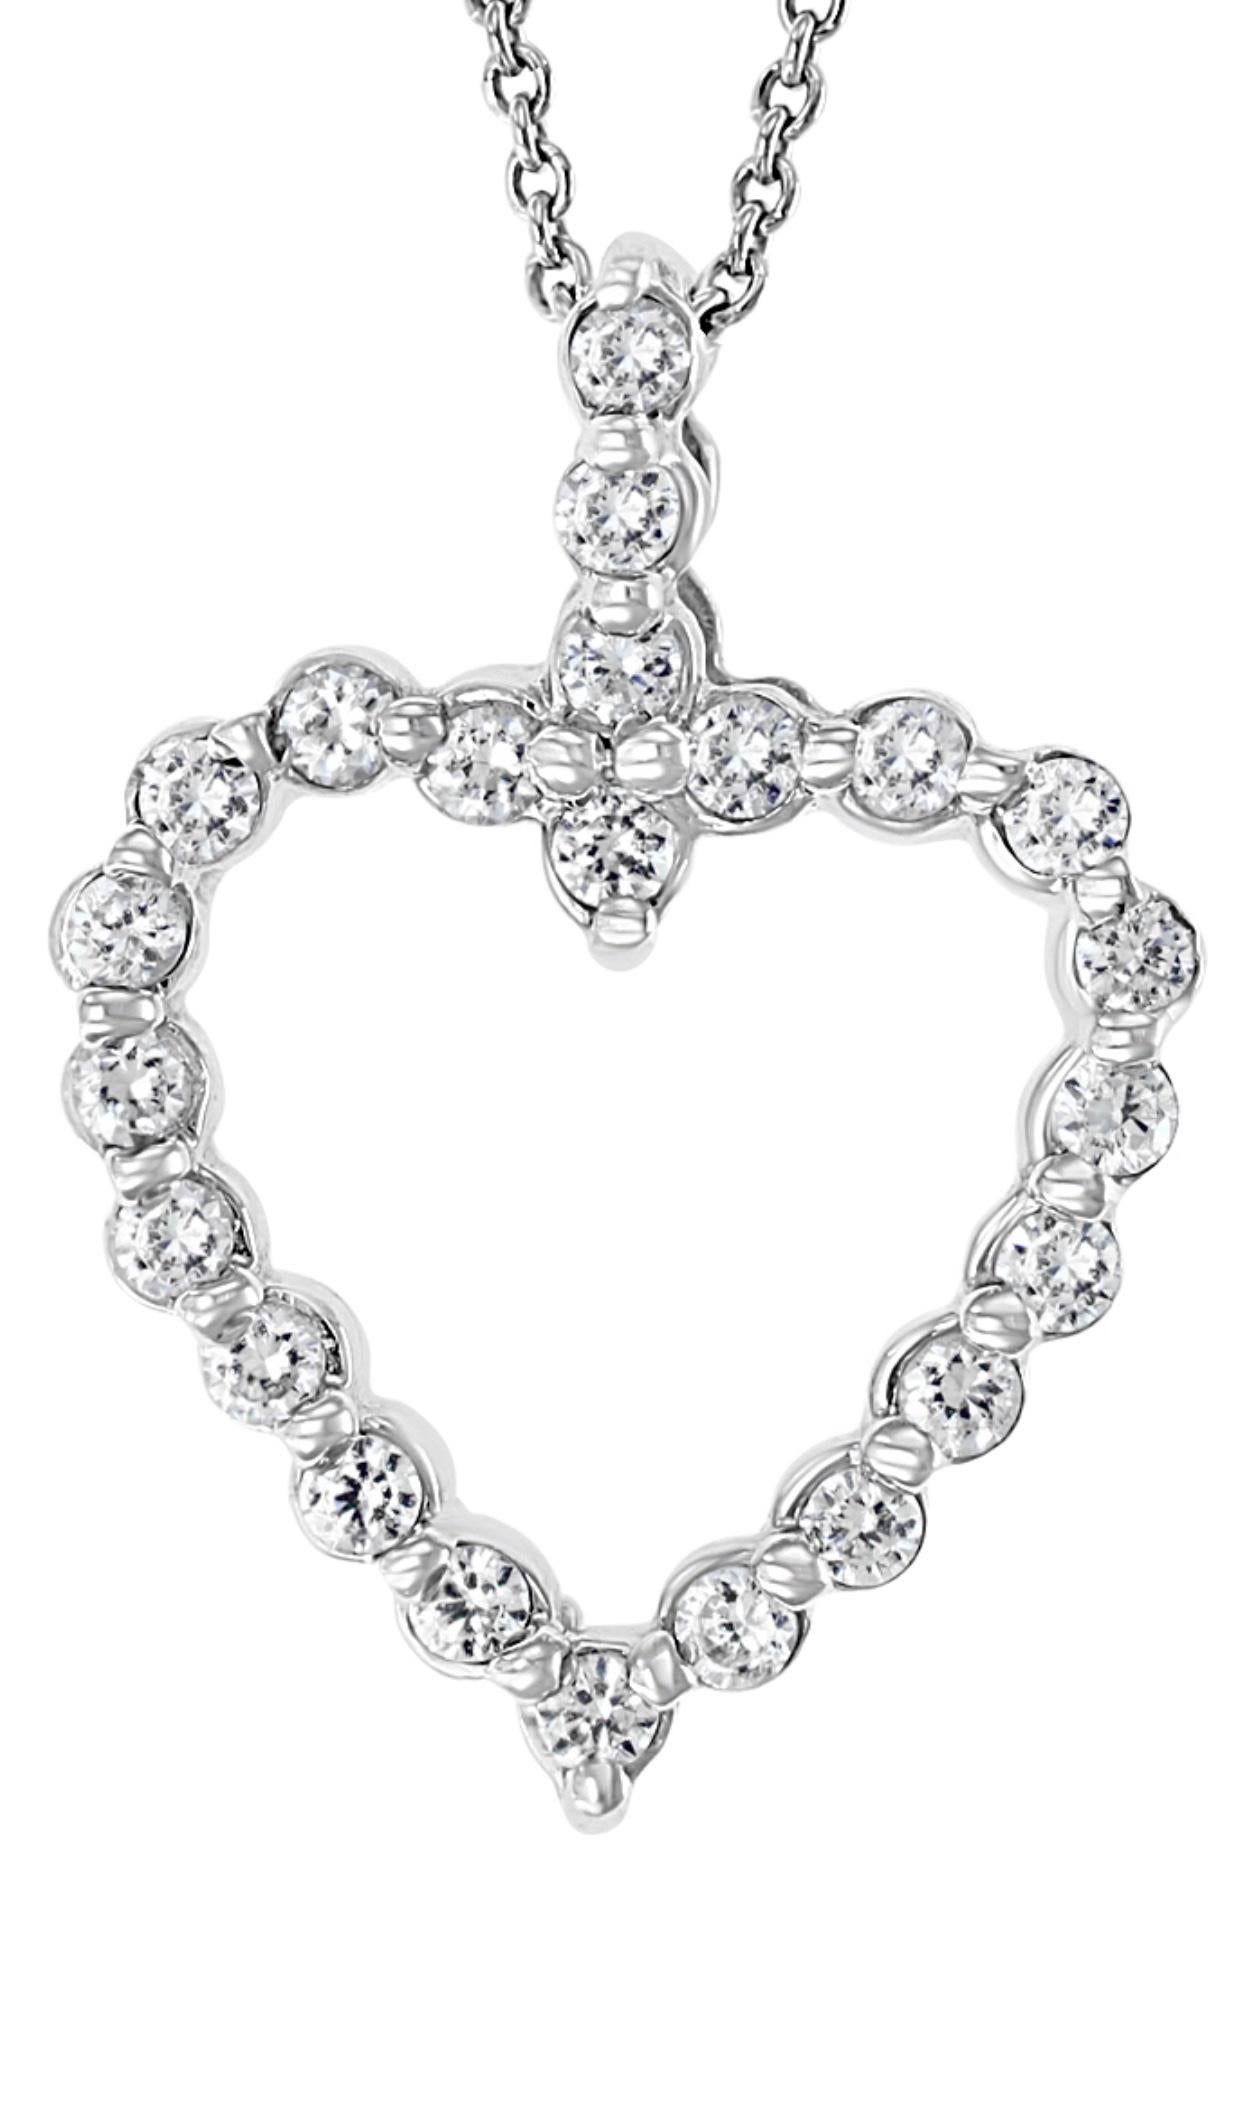 1 Carat Diamond Heart Pendant/ Necklace 14 Karat White Gold with Chain For Sale 3